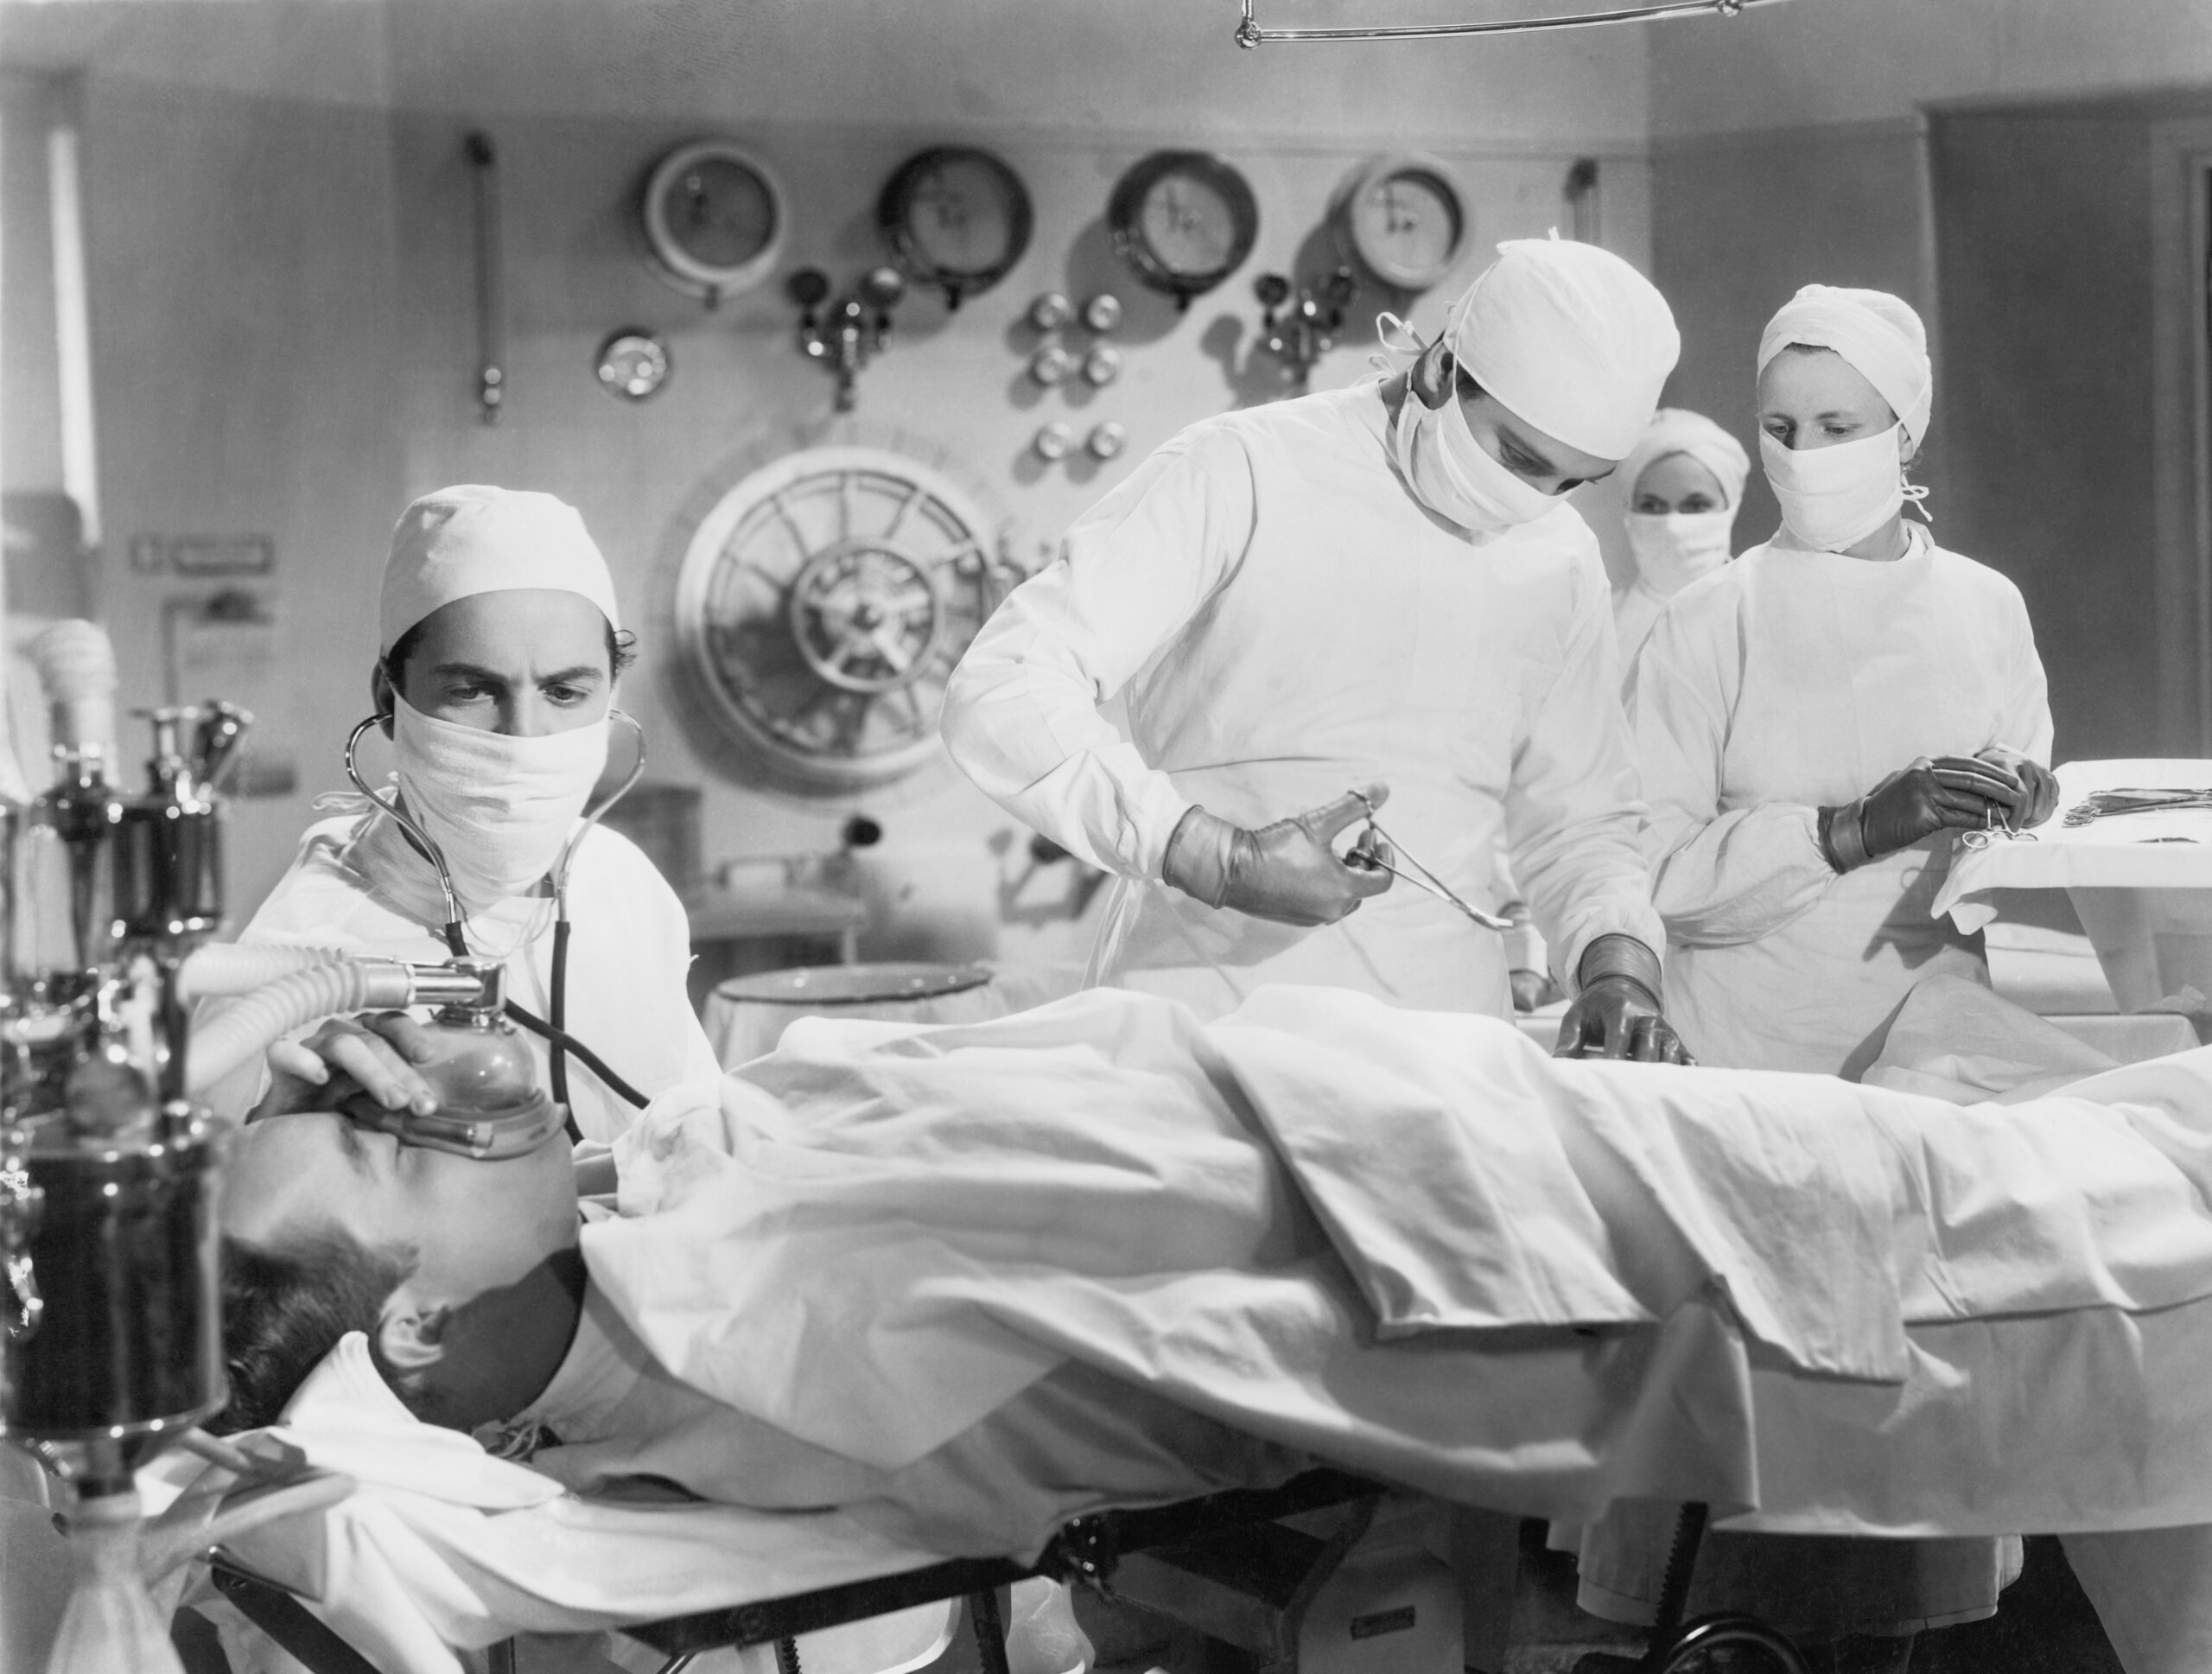 A Historical Glimpse of Suturing